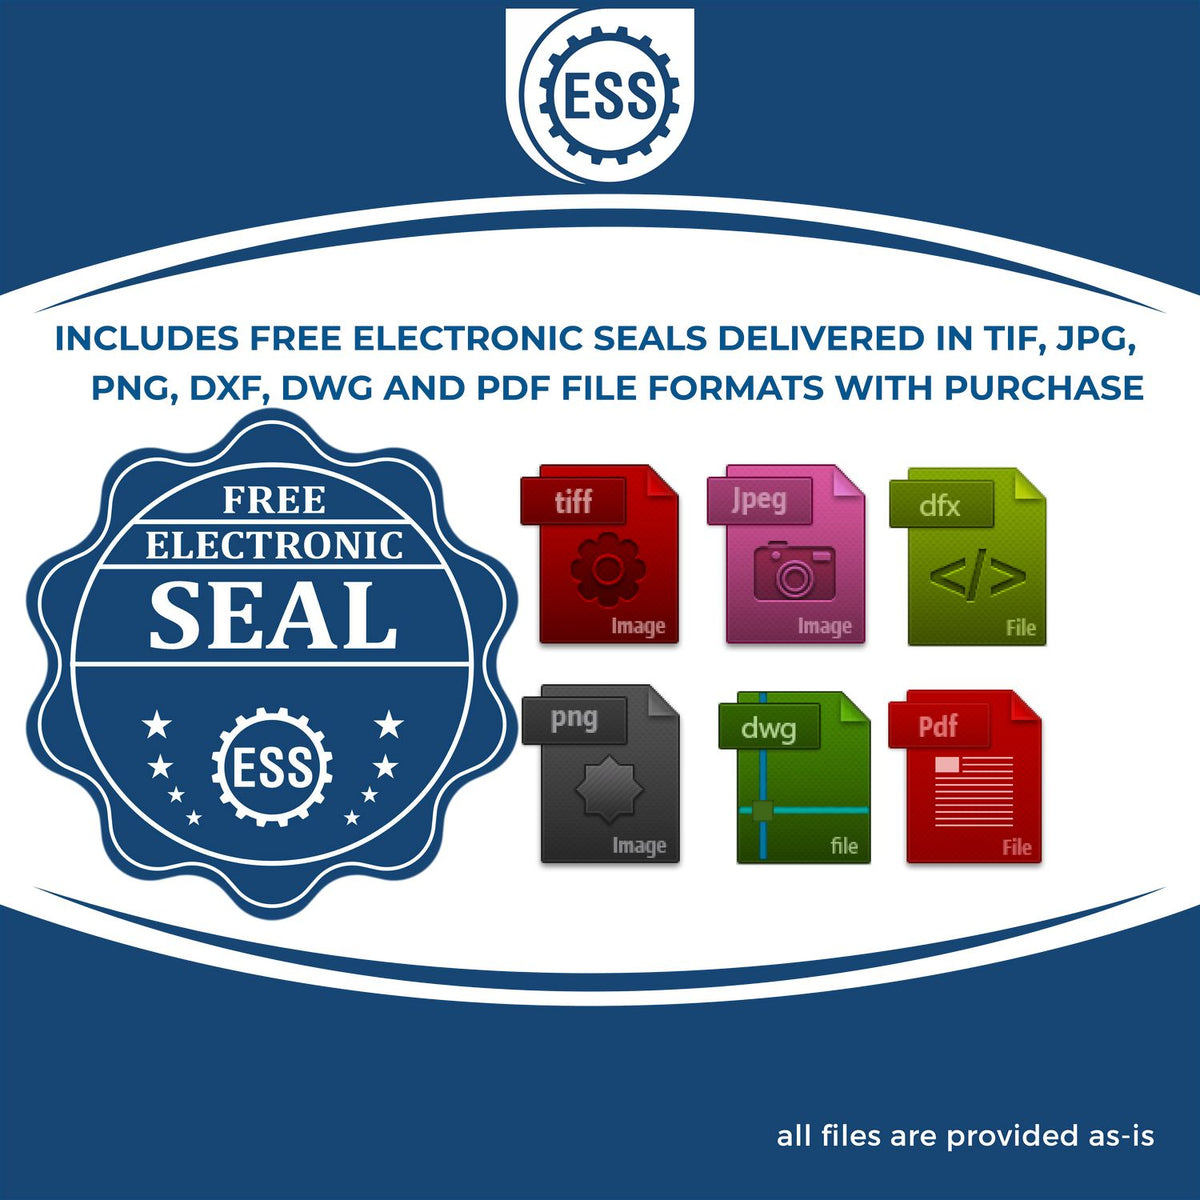 An infographic for the free electronic seal for the Hybrid South Carolina Land Surveyor Seal illustrating the different file type icons such as DXF, DWG, TIF, JPG and PNG.